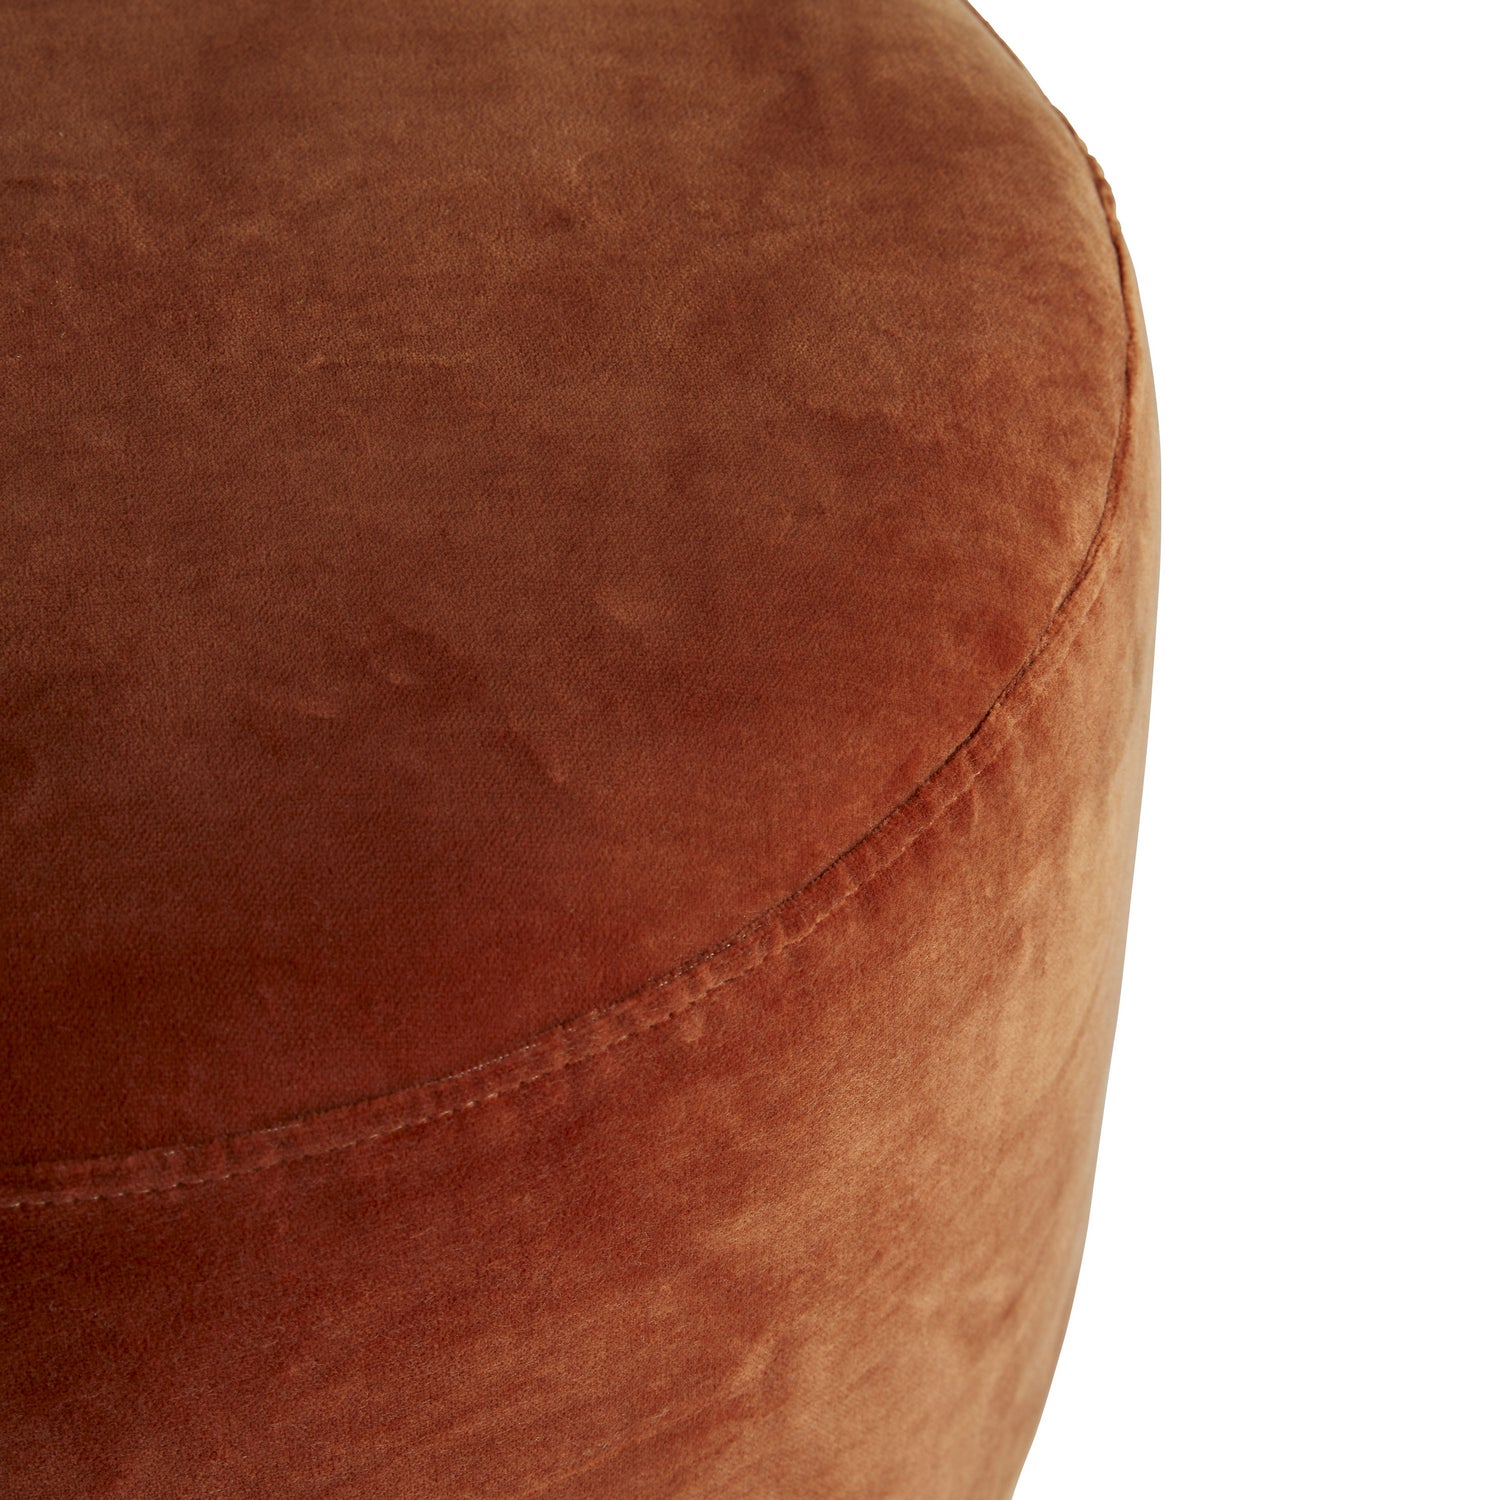 Ottoman from the Avalon collection in Persimmon finish